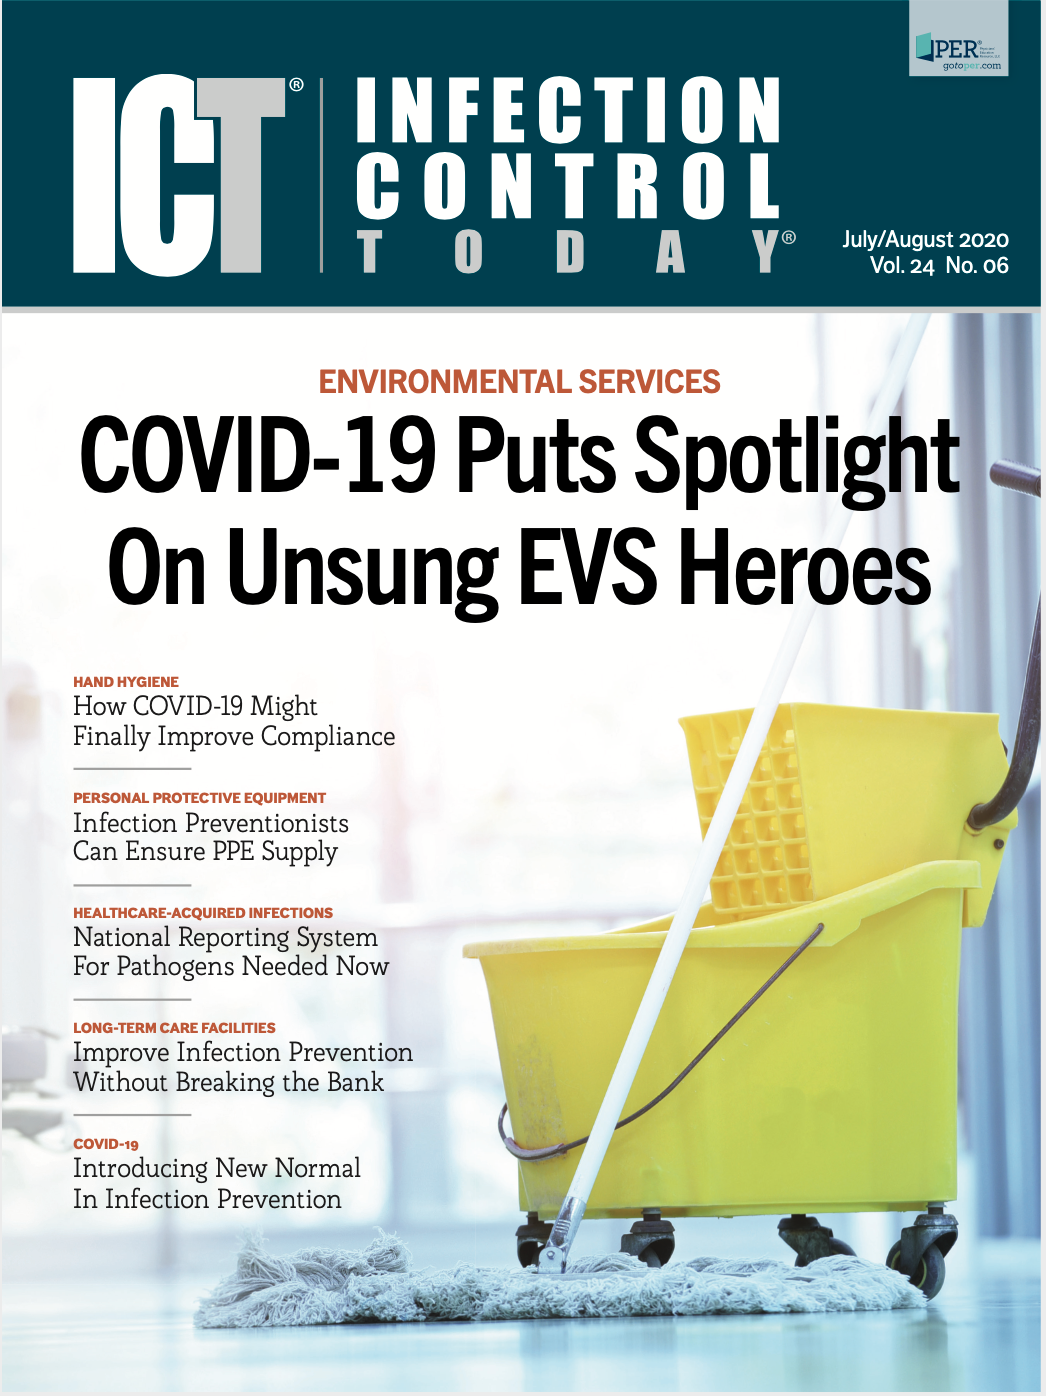 Infection Control Today, July/August 2020 (Vol. 24 No. 06)